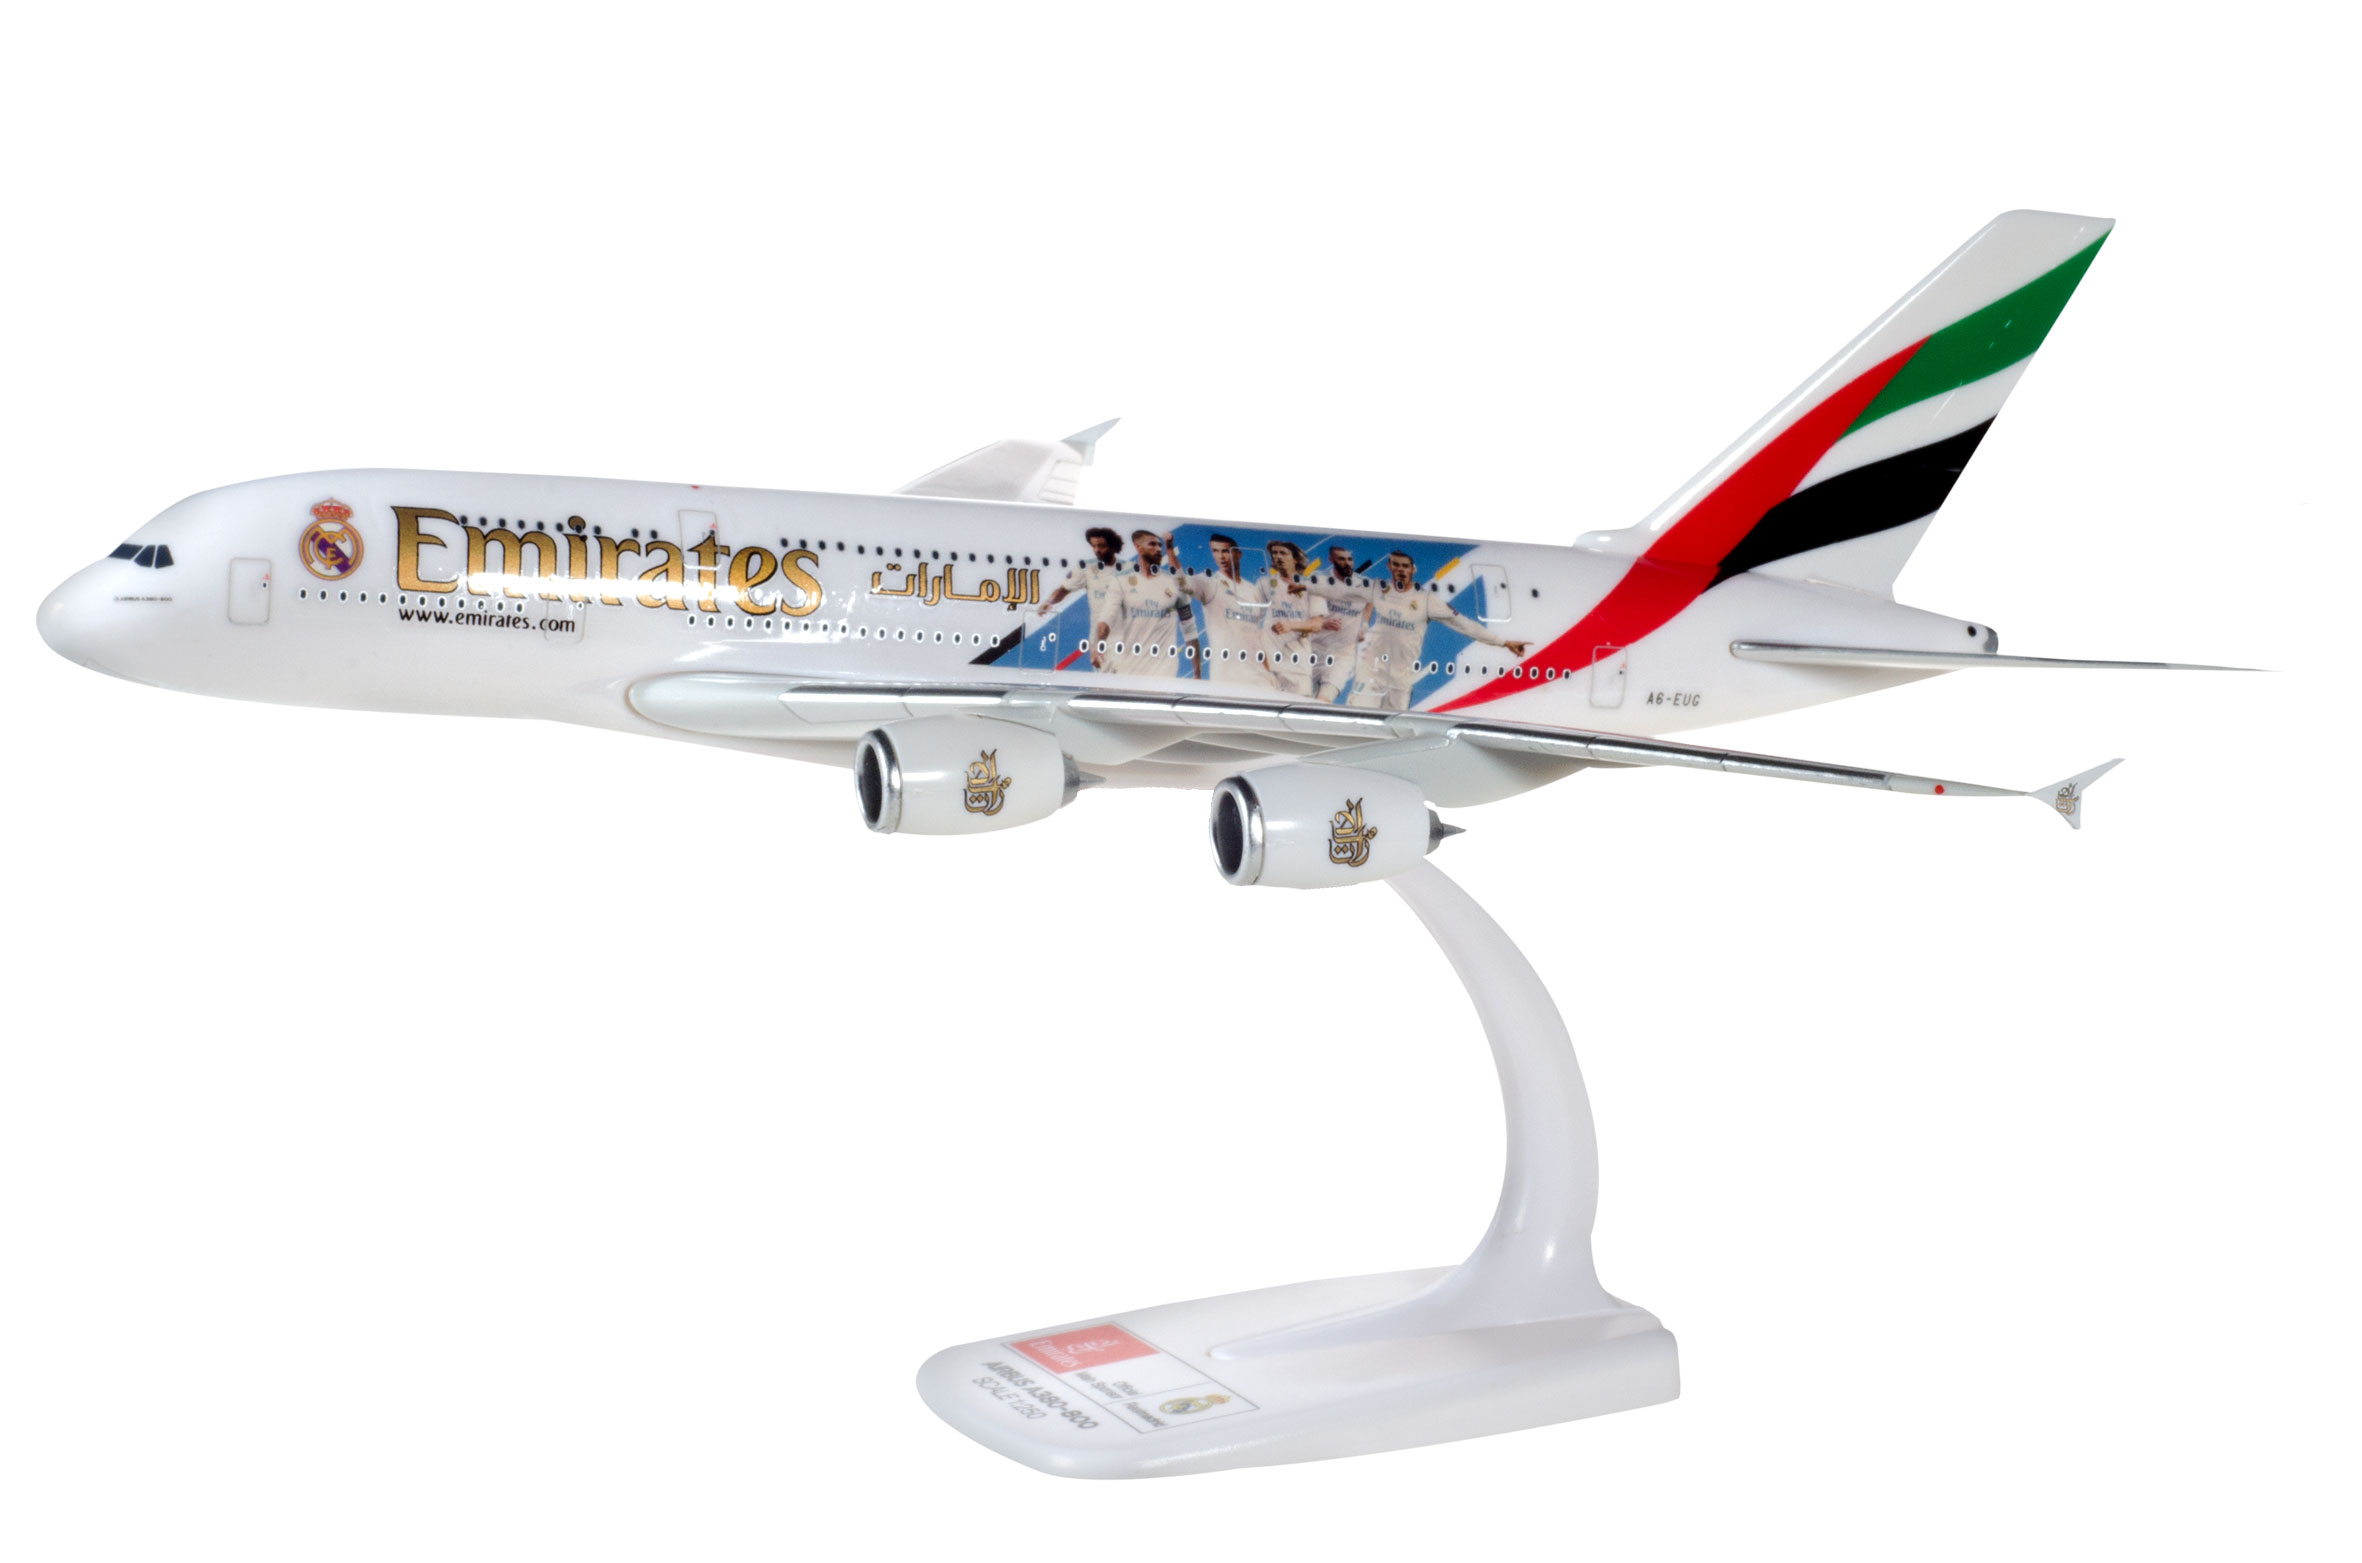 Emirates A380 Real Madrid Herpa Plastic Model Aircraft 1/250 Scale HE612142